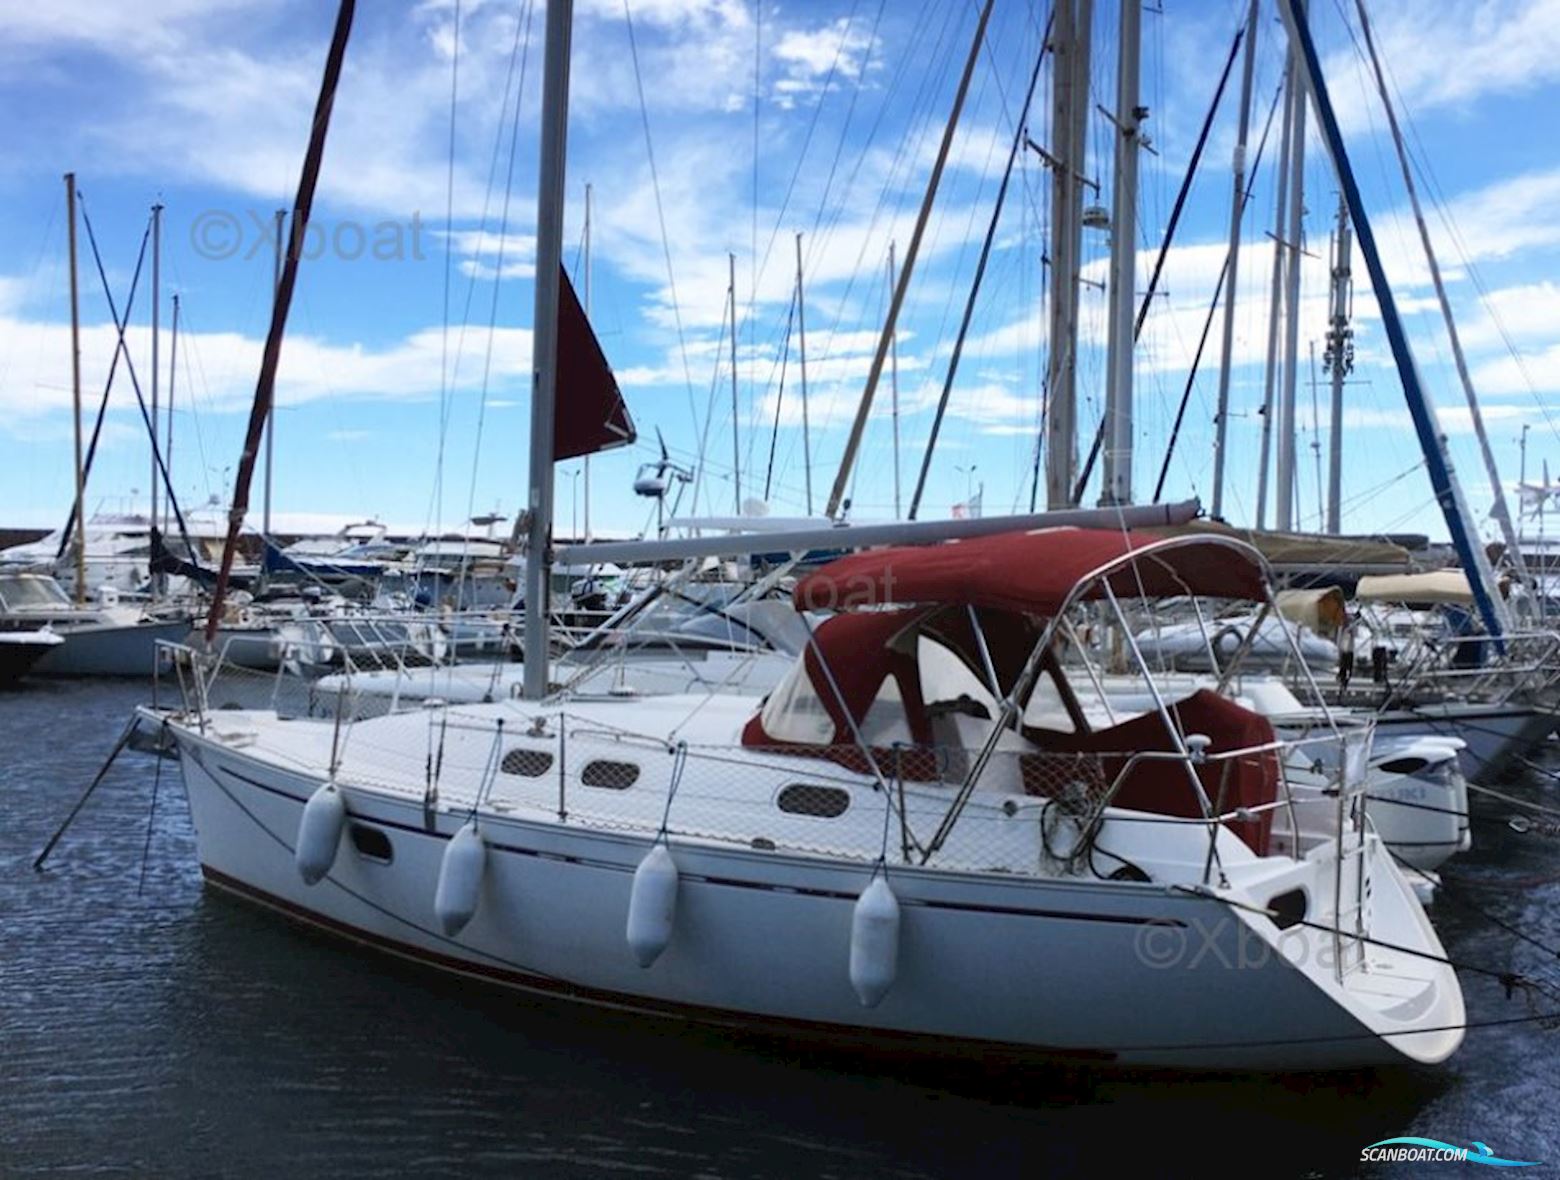 Dufour Gib Sea 33 Sailing boat 2000, with Yanmar engine, France